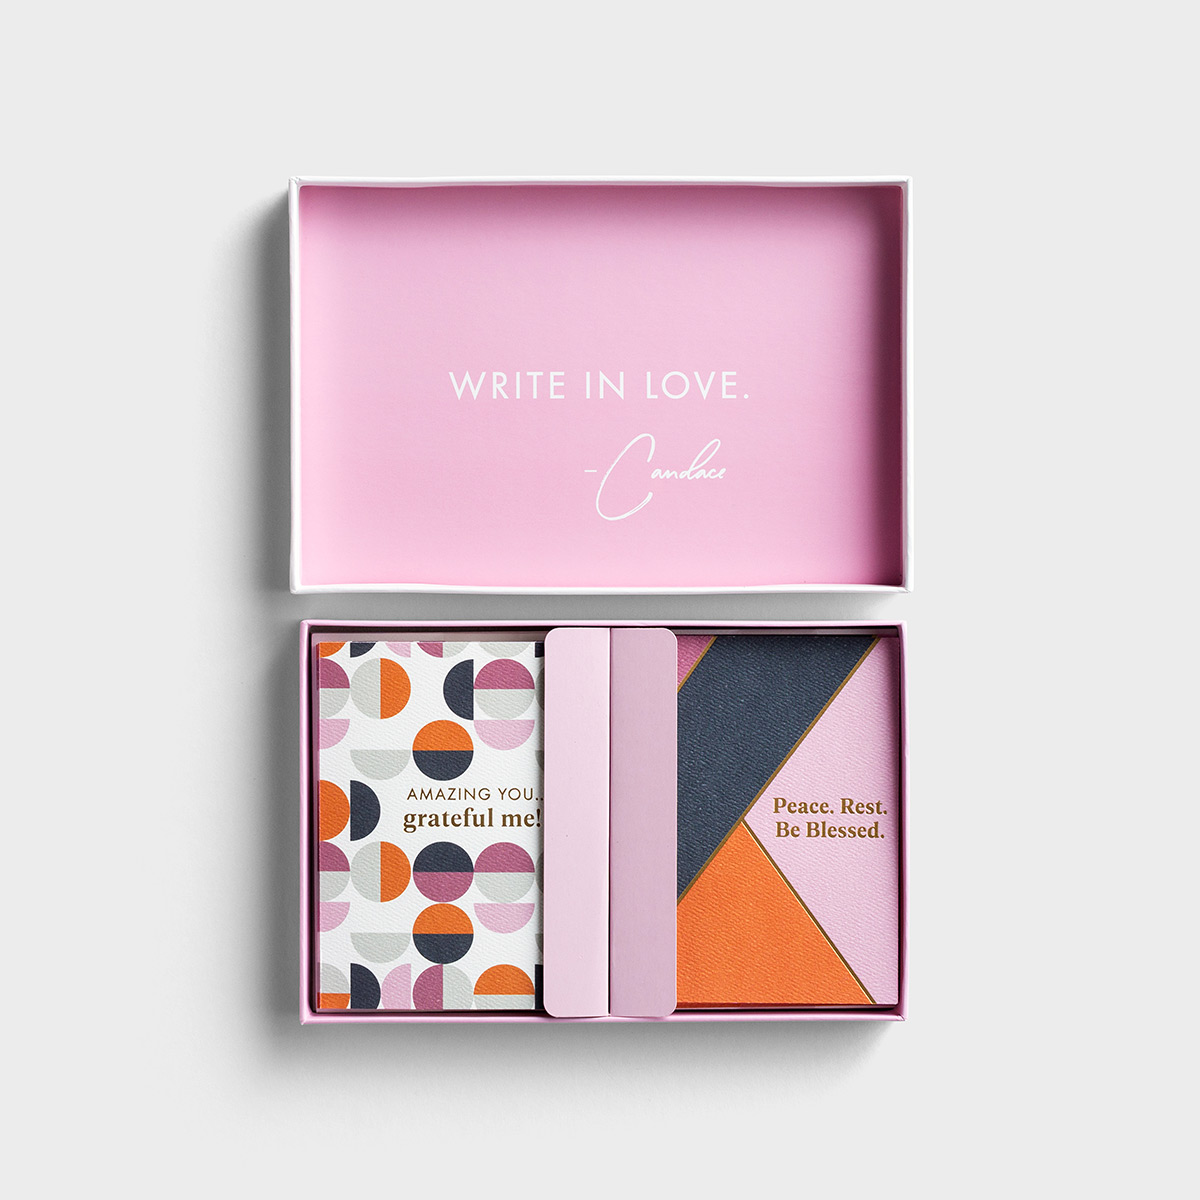 Candace Cameron Bure - Write in Love - Everyday Card Set with Keepsake Box